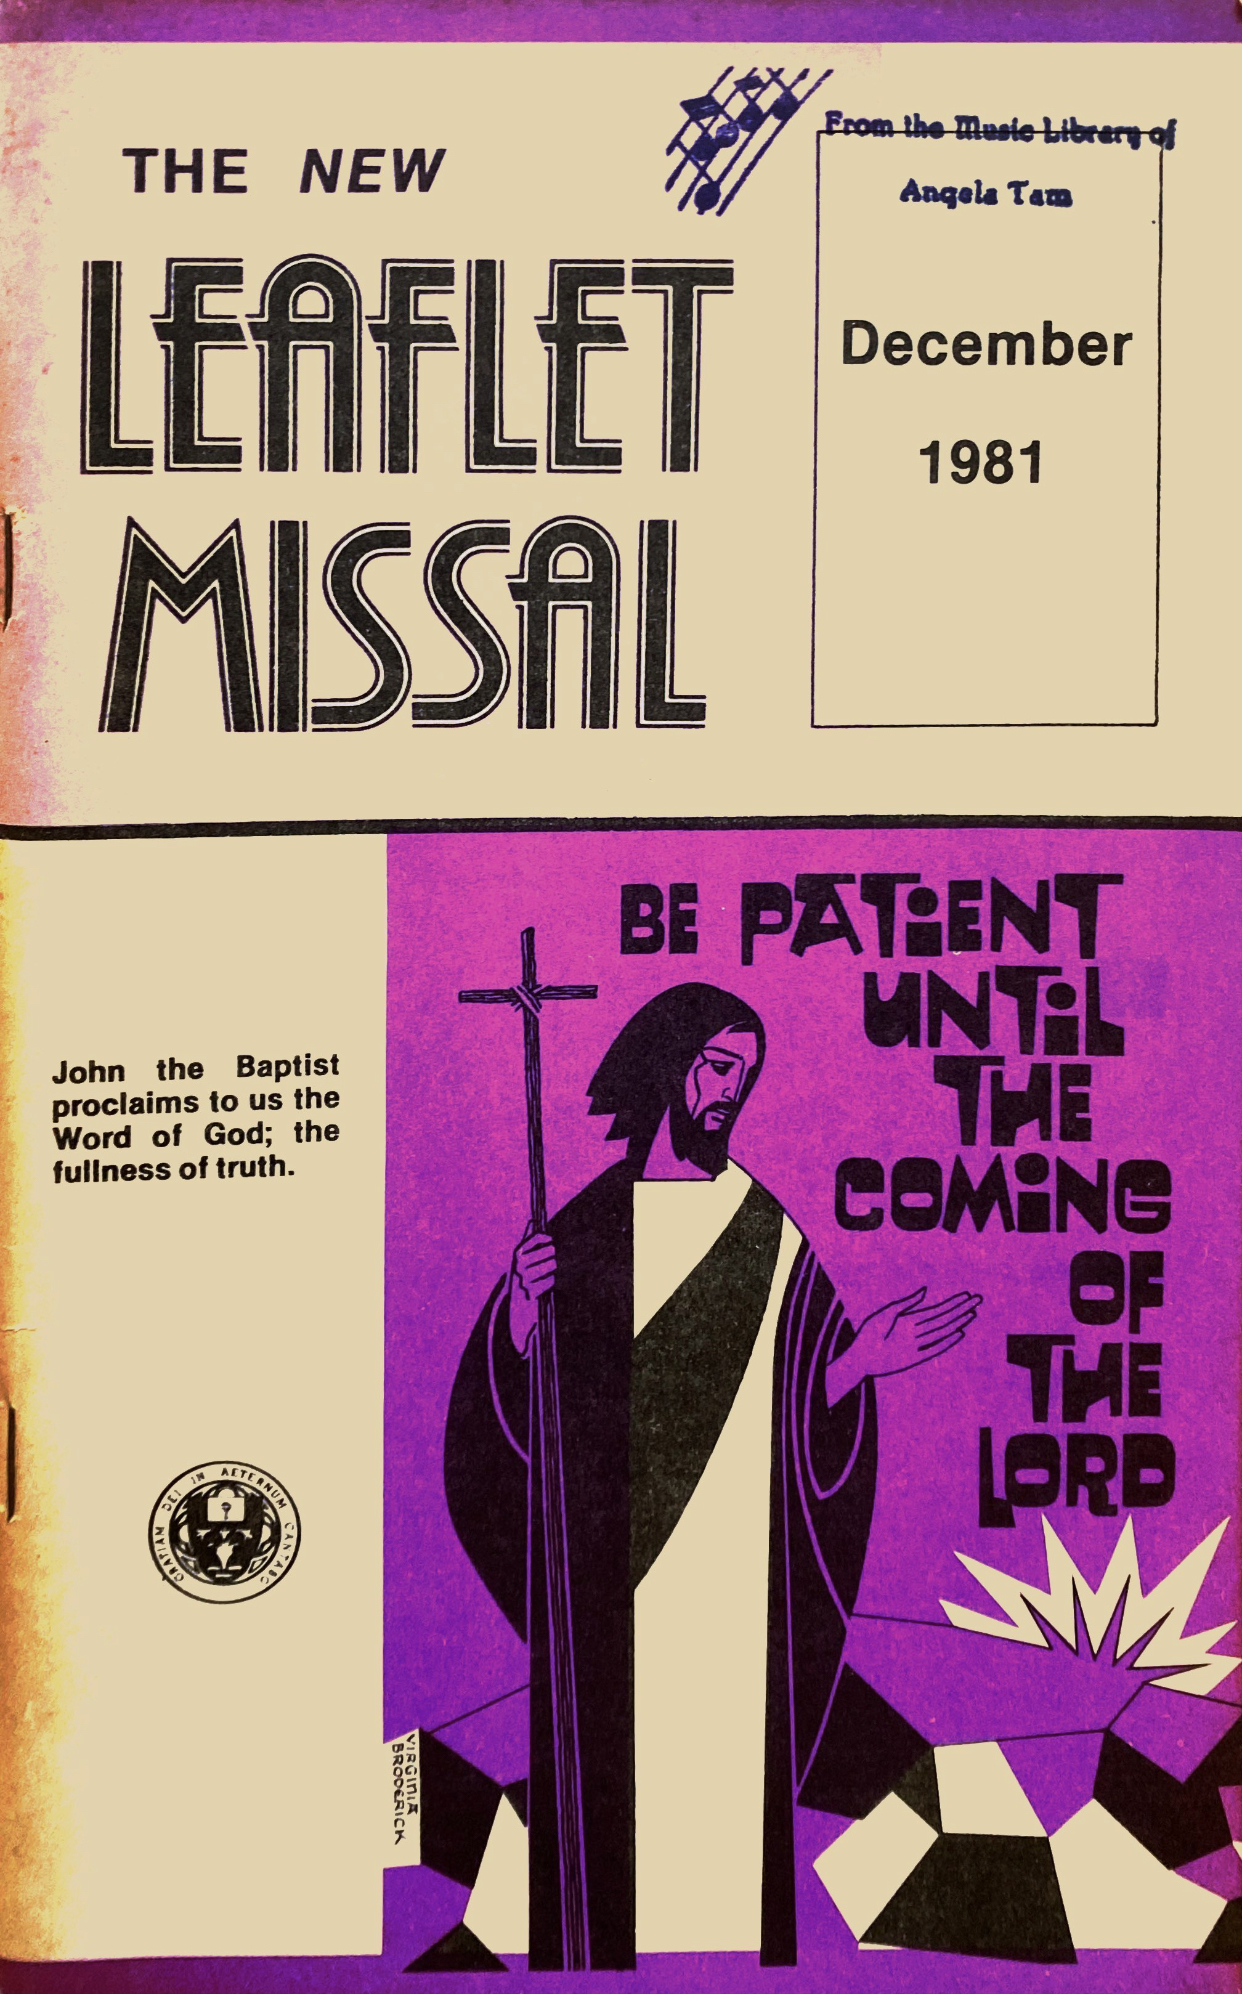 Cover of Leaflet Missal: Be Patient Until the Coming of the Lord December 1981